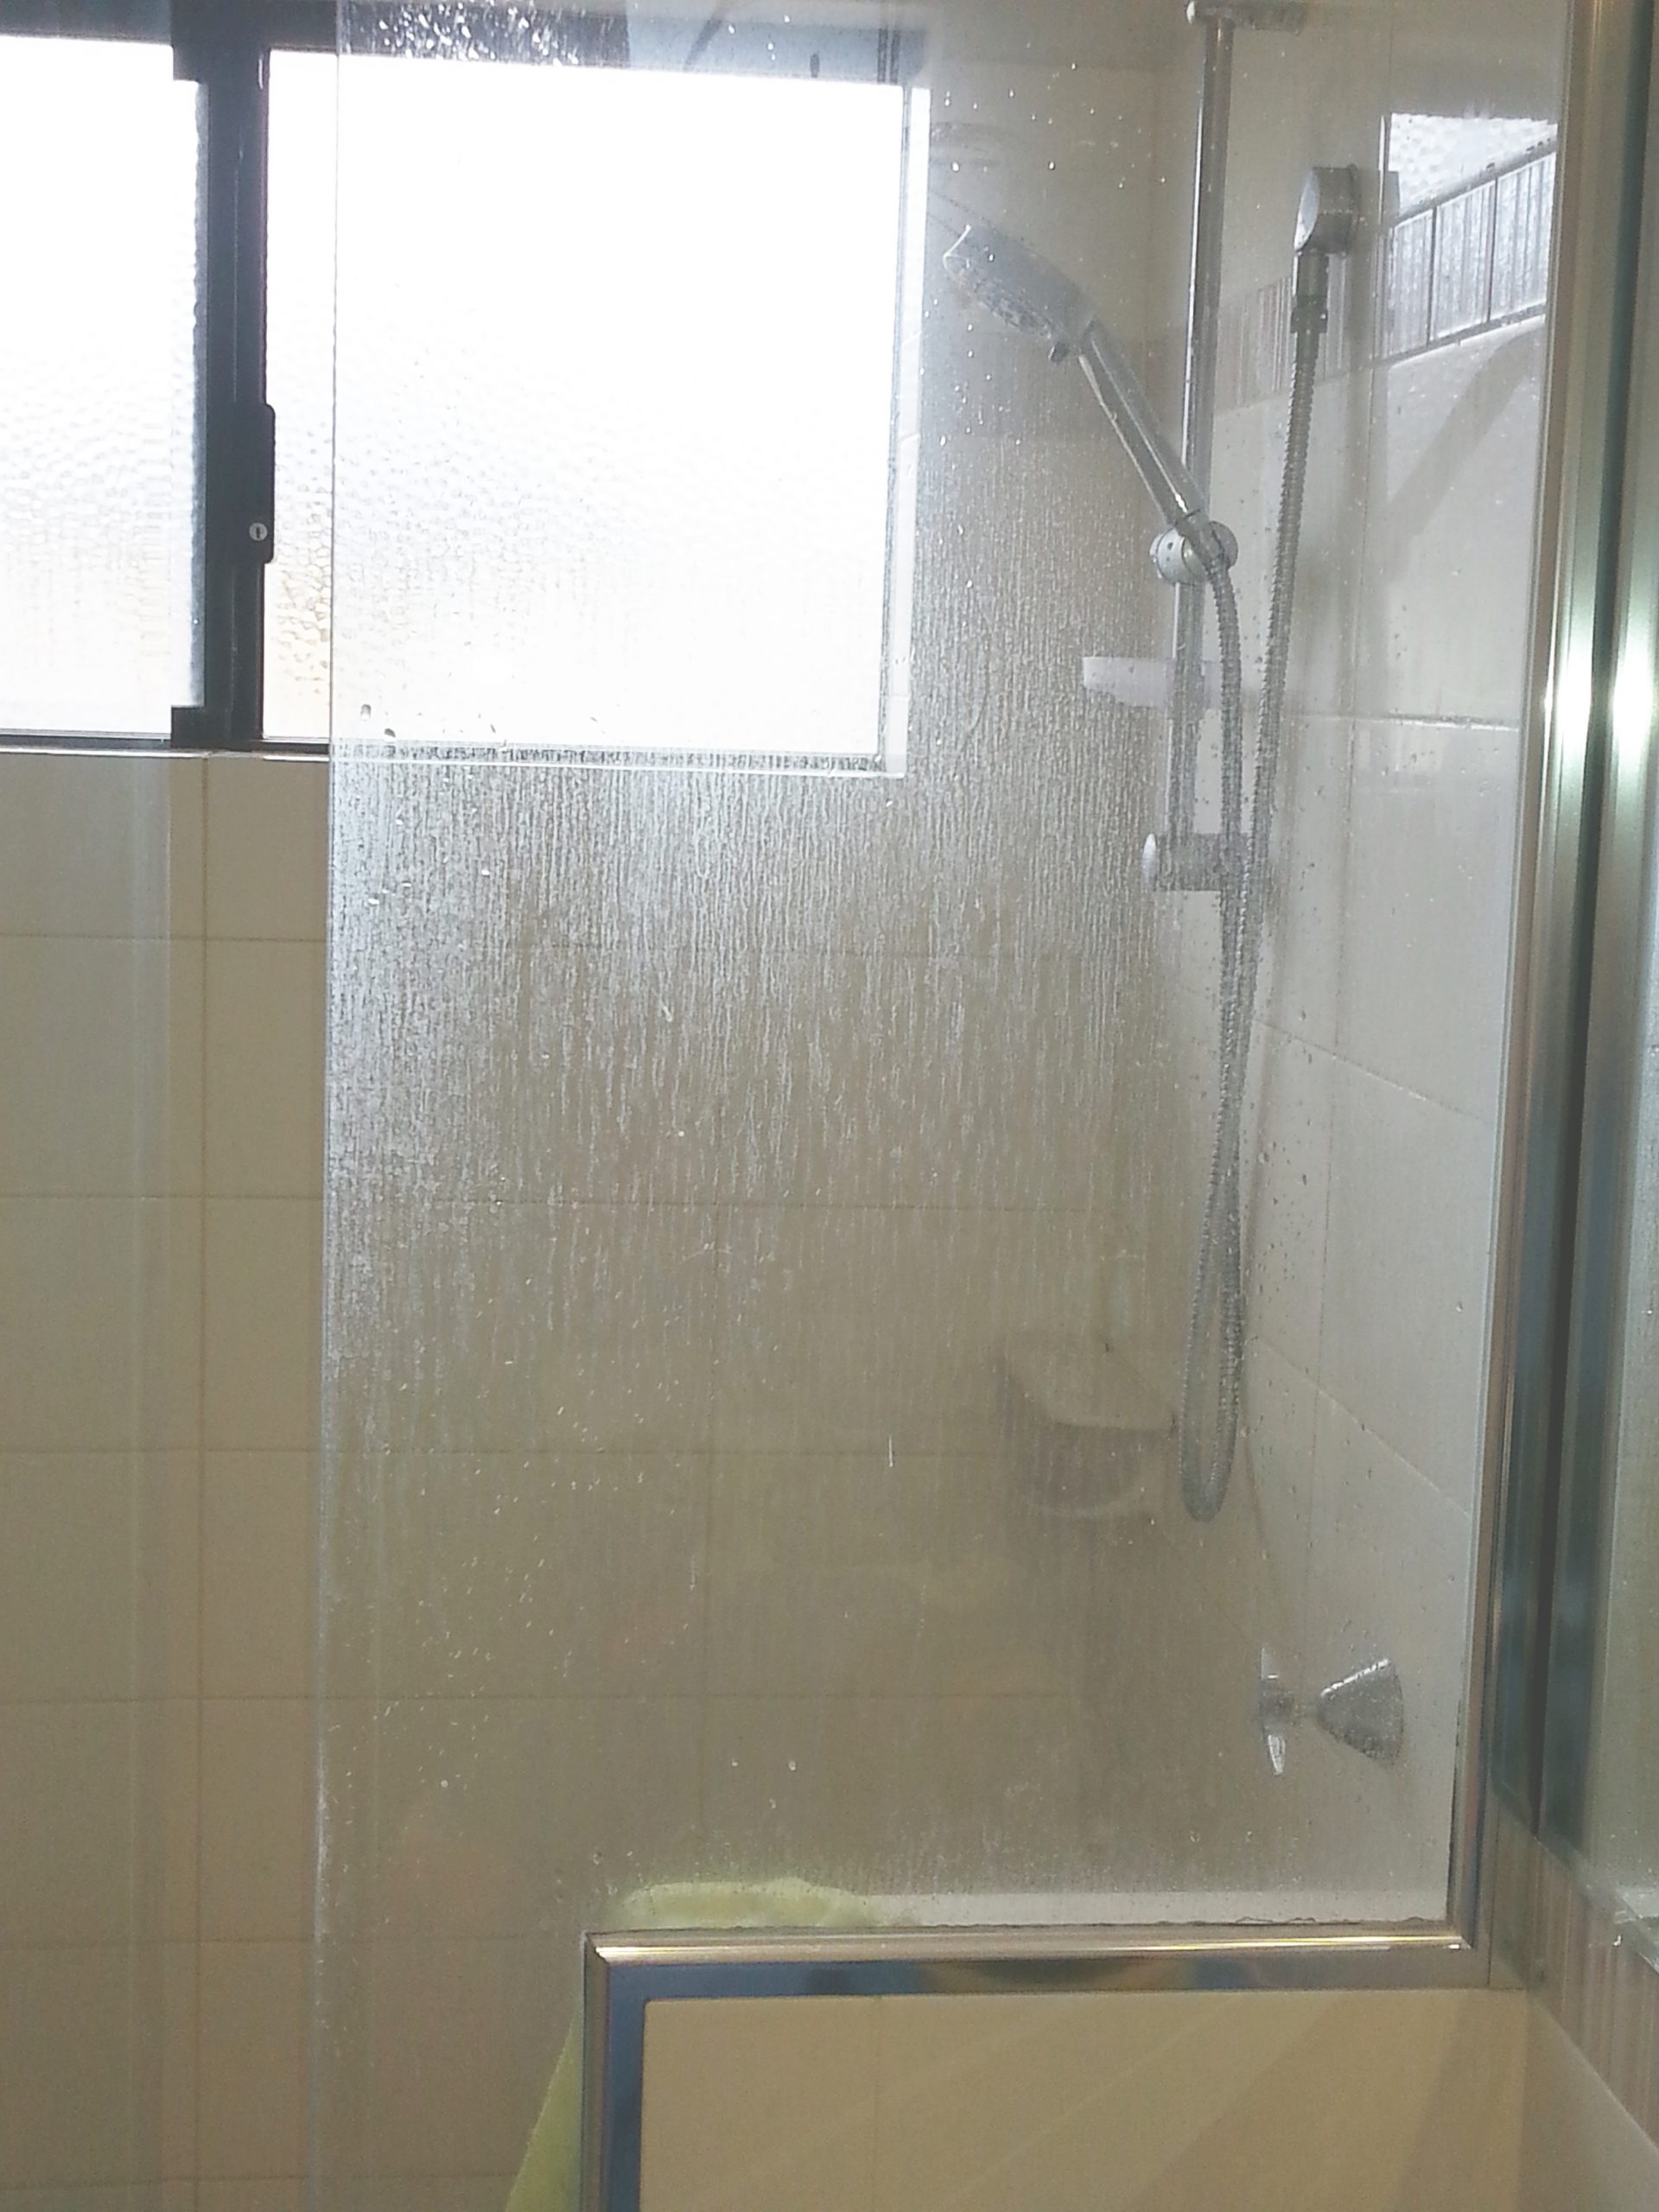 Cleaning soap scum off shower glass panels